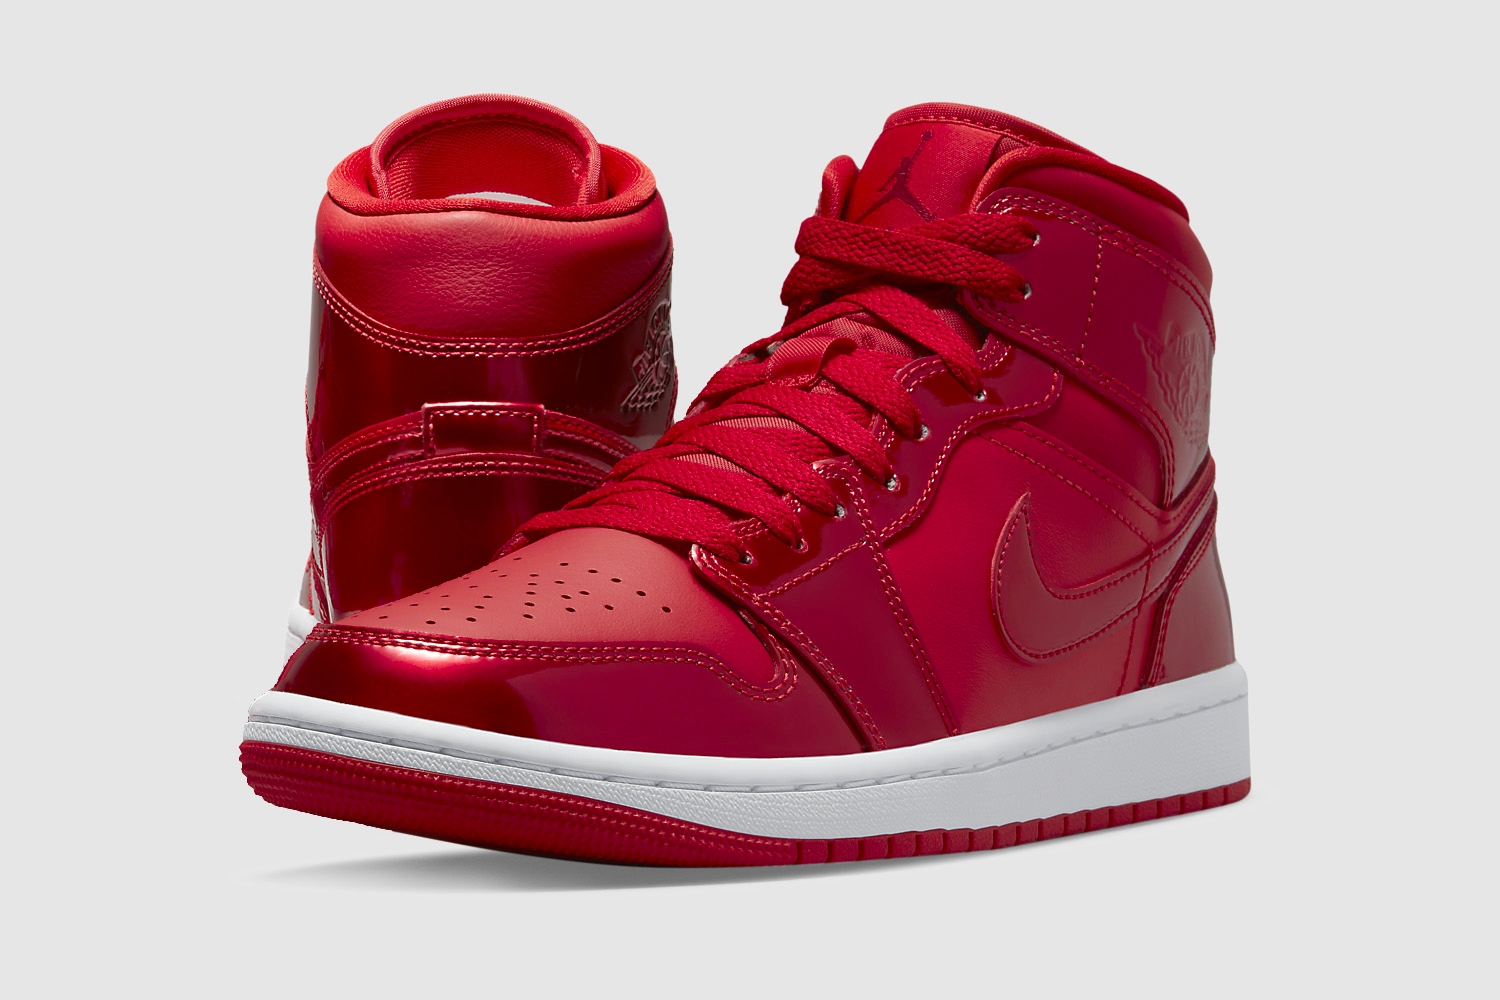 The Air Jordan 1 Mid in a 'Pomegranate' colorway